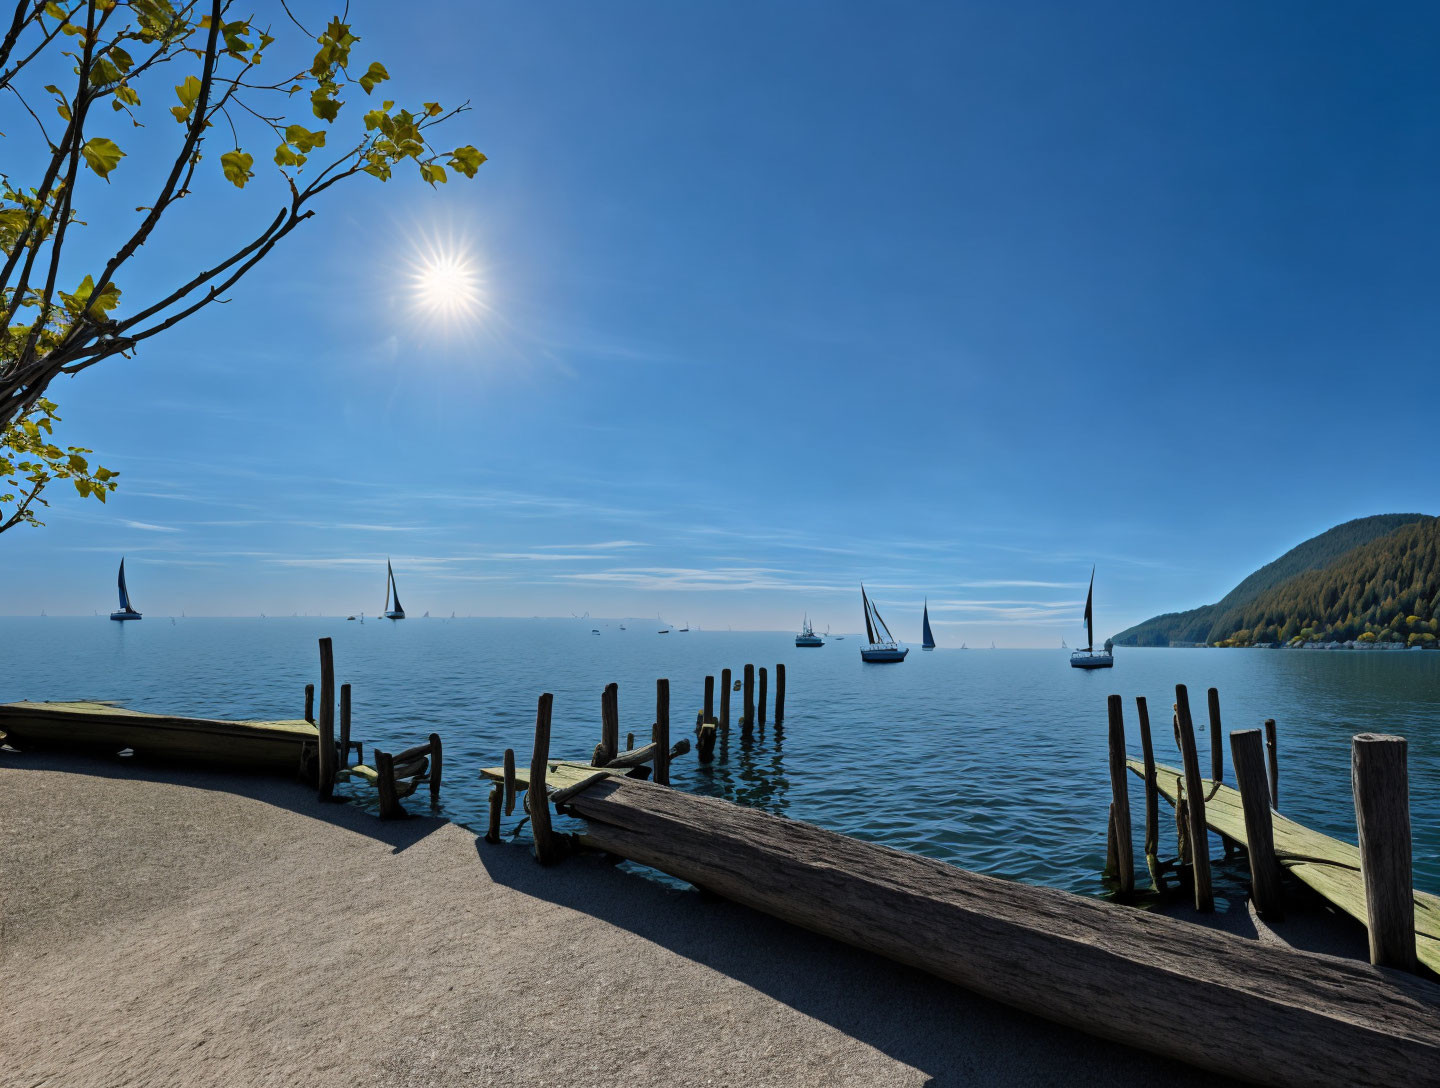 Tranquil lakeside scene with sailboats, hills, and sunny sky